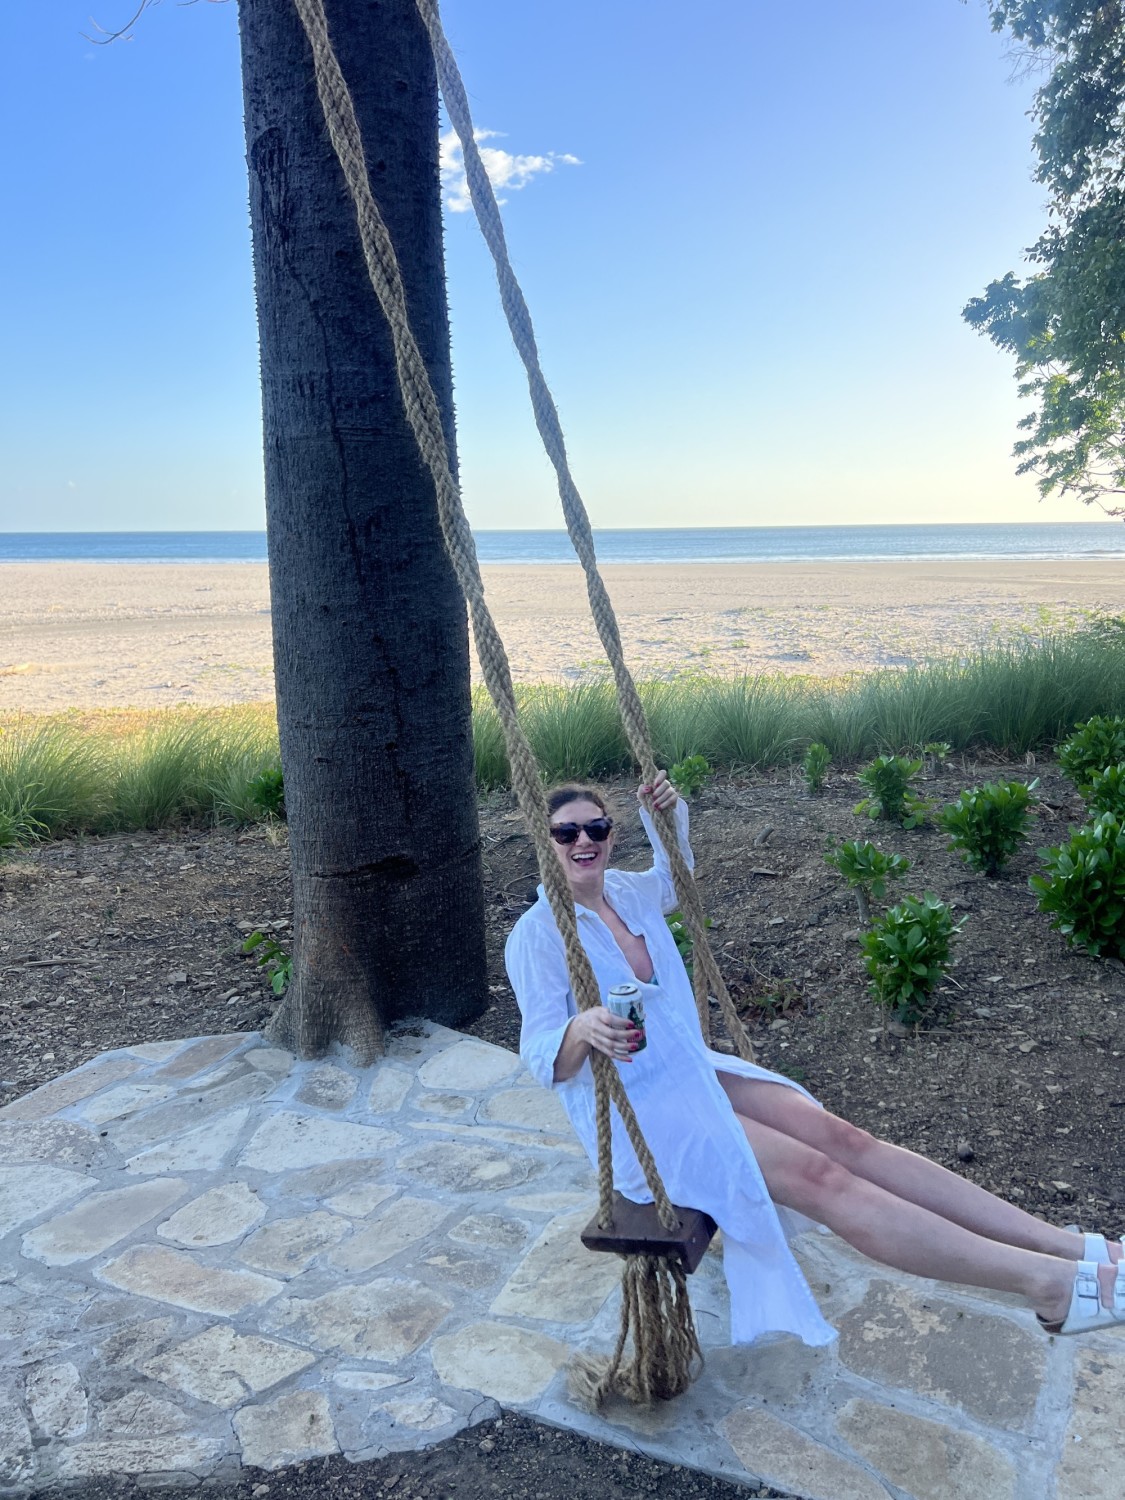 Travel advisor Emily in a white dress posing on a low swing with a long rope in front of a beach on a sunny day